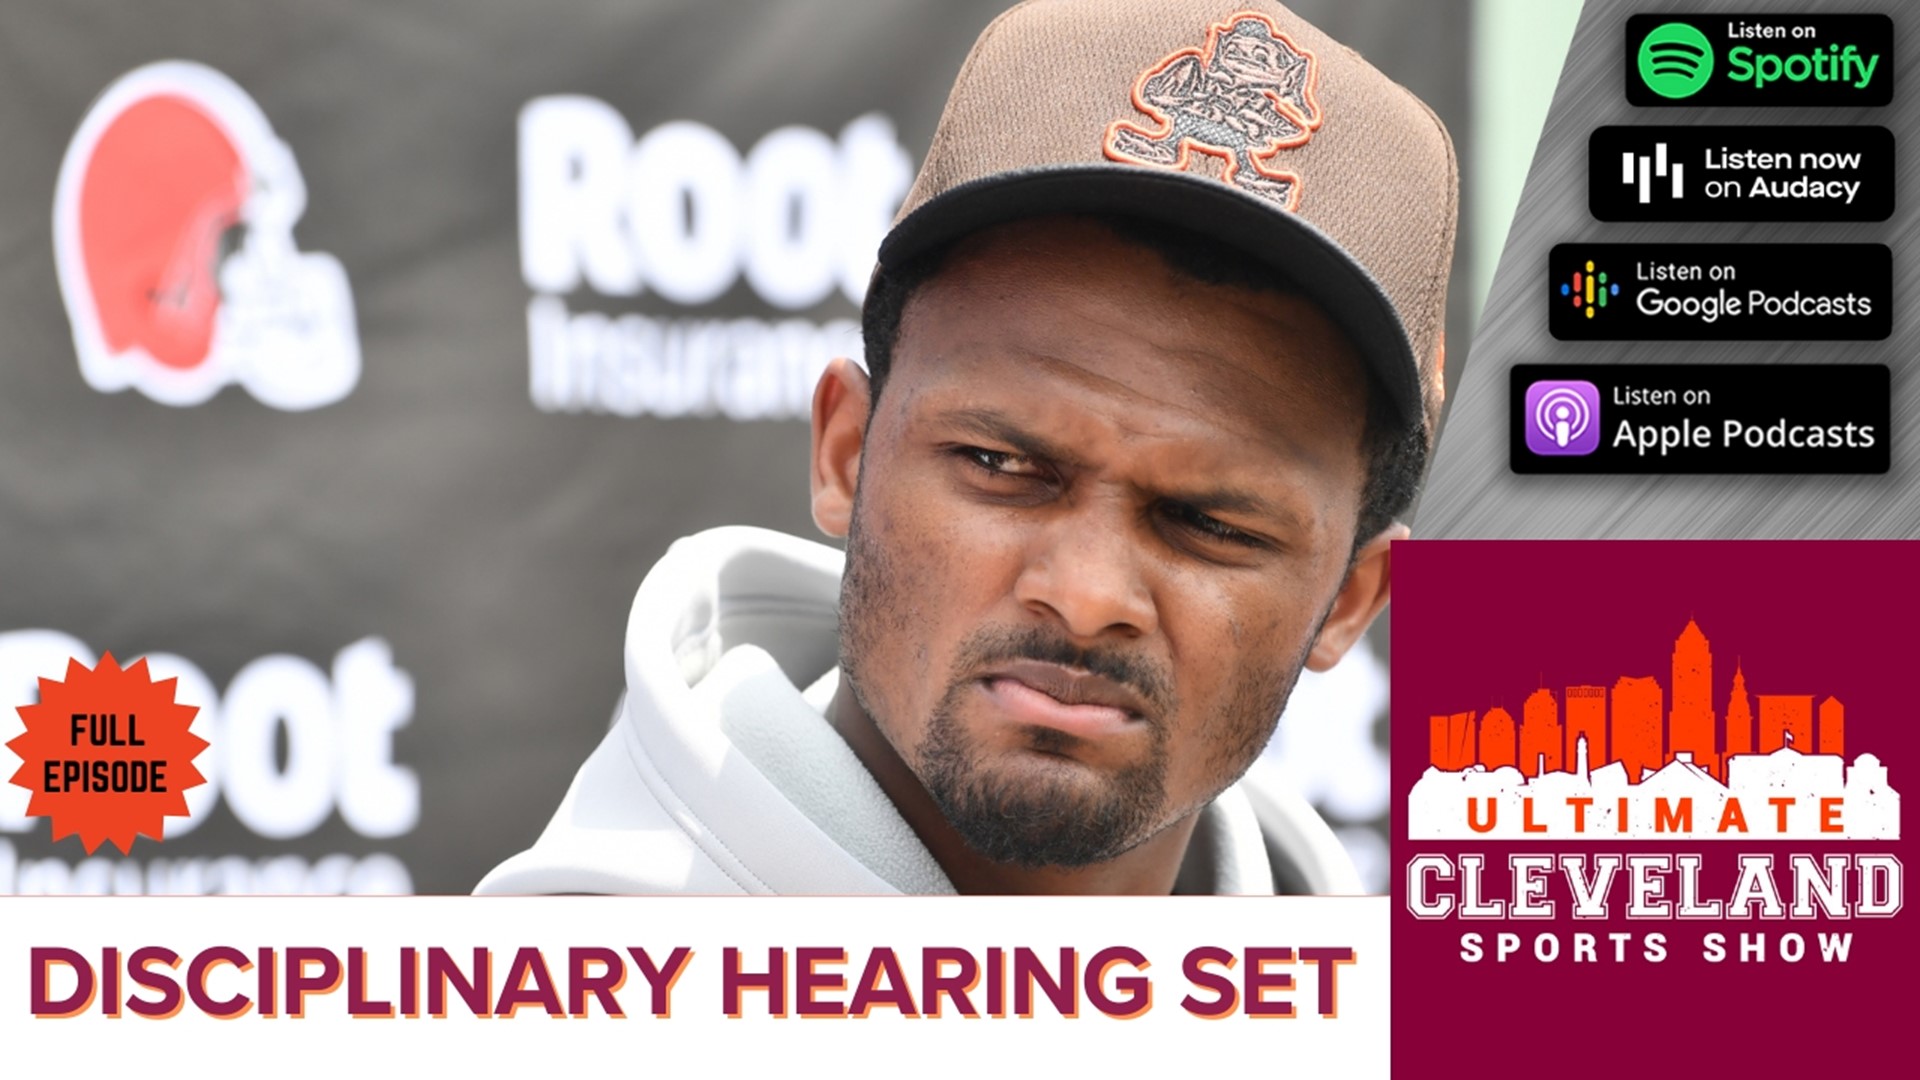 The UCSS crew reacts to Deshaun Watson beginning trial on Tuesday, discusses Baker Mayfield trades and Aditi Kinkhabwala joins to weigh in on it all.